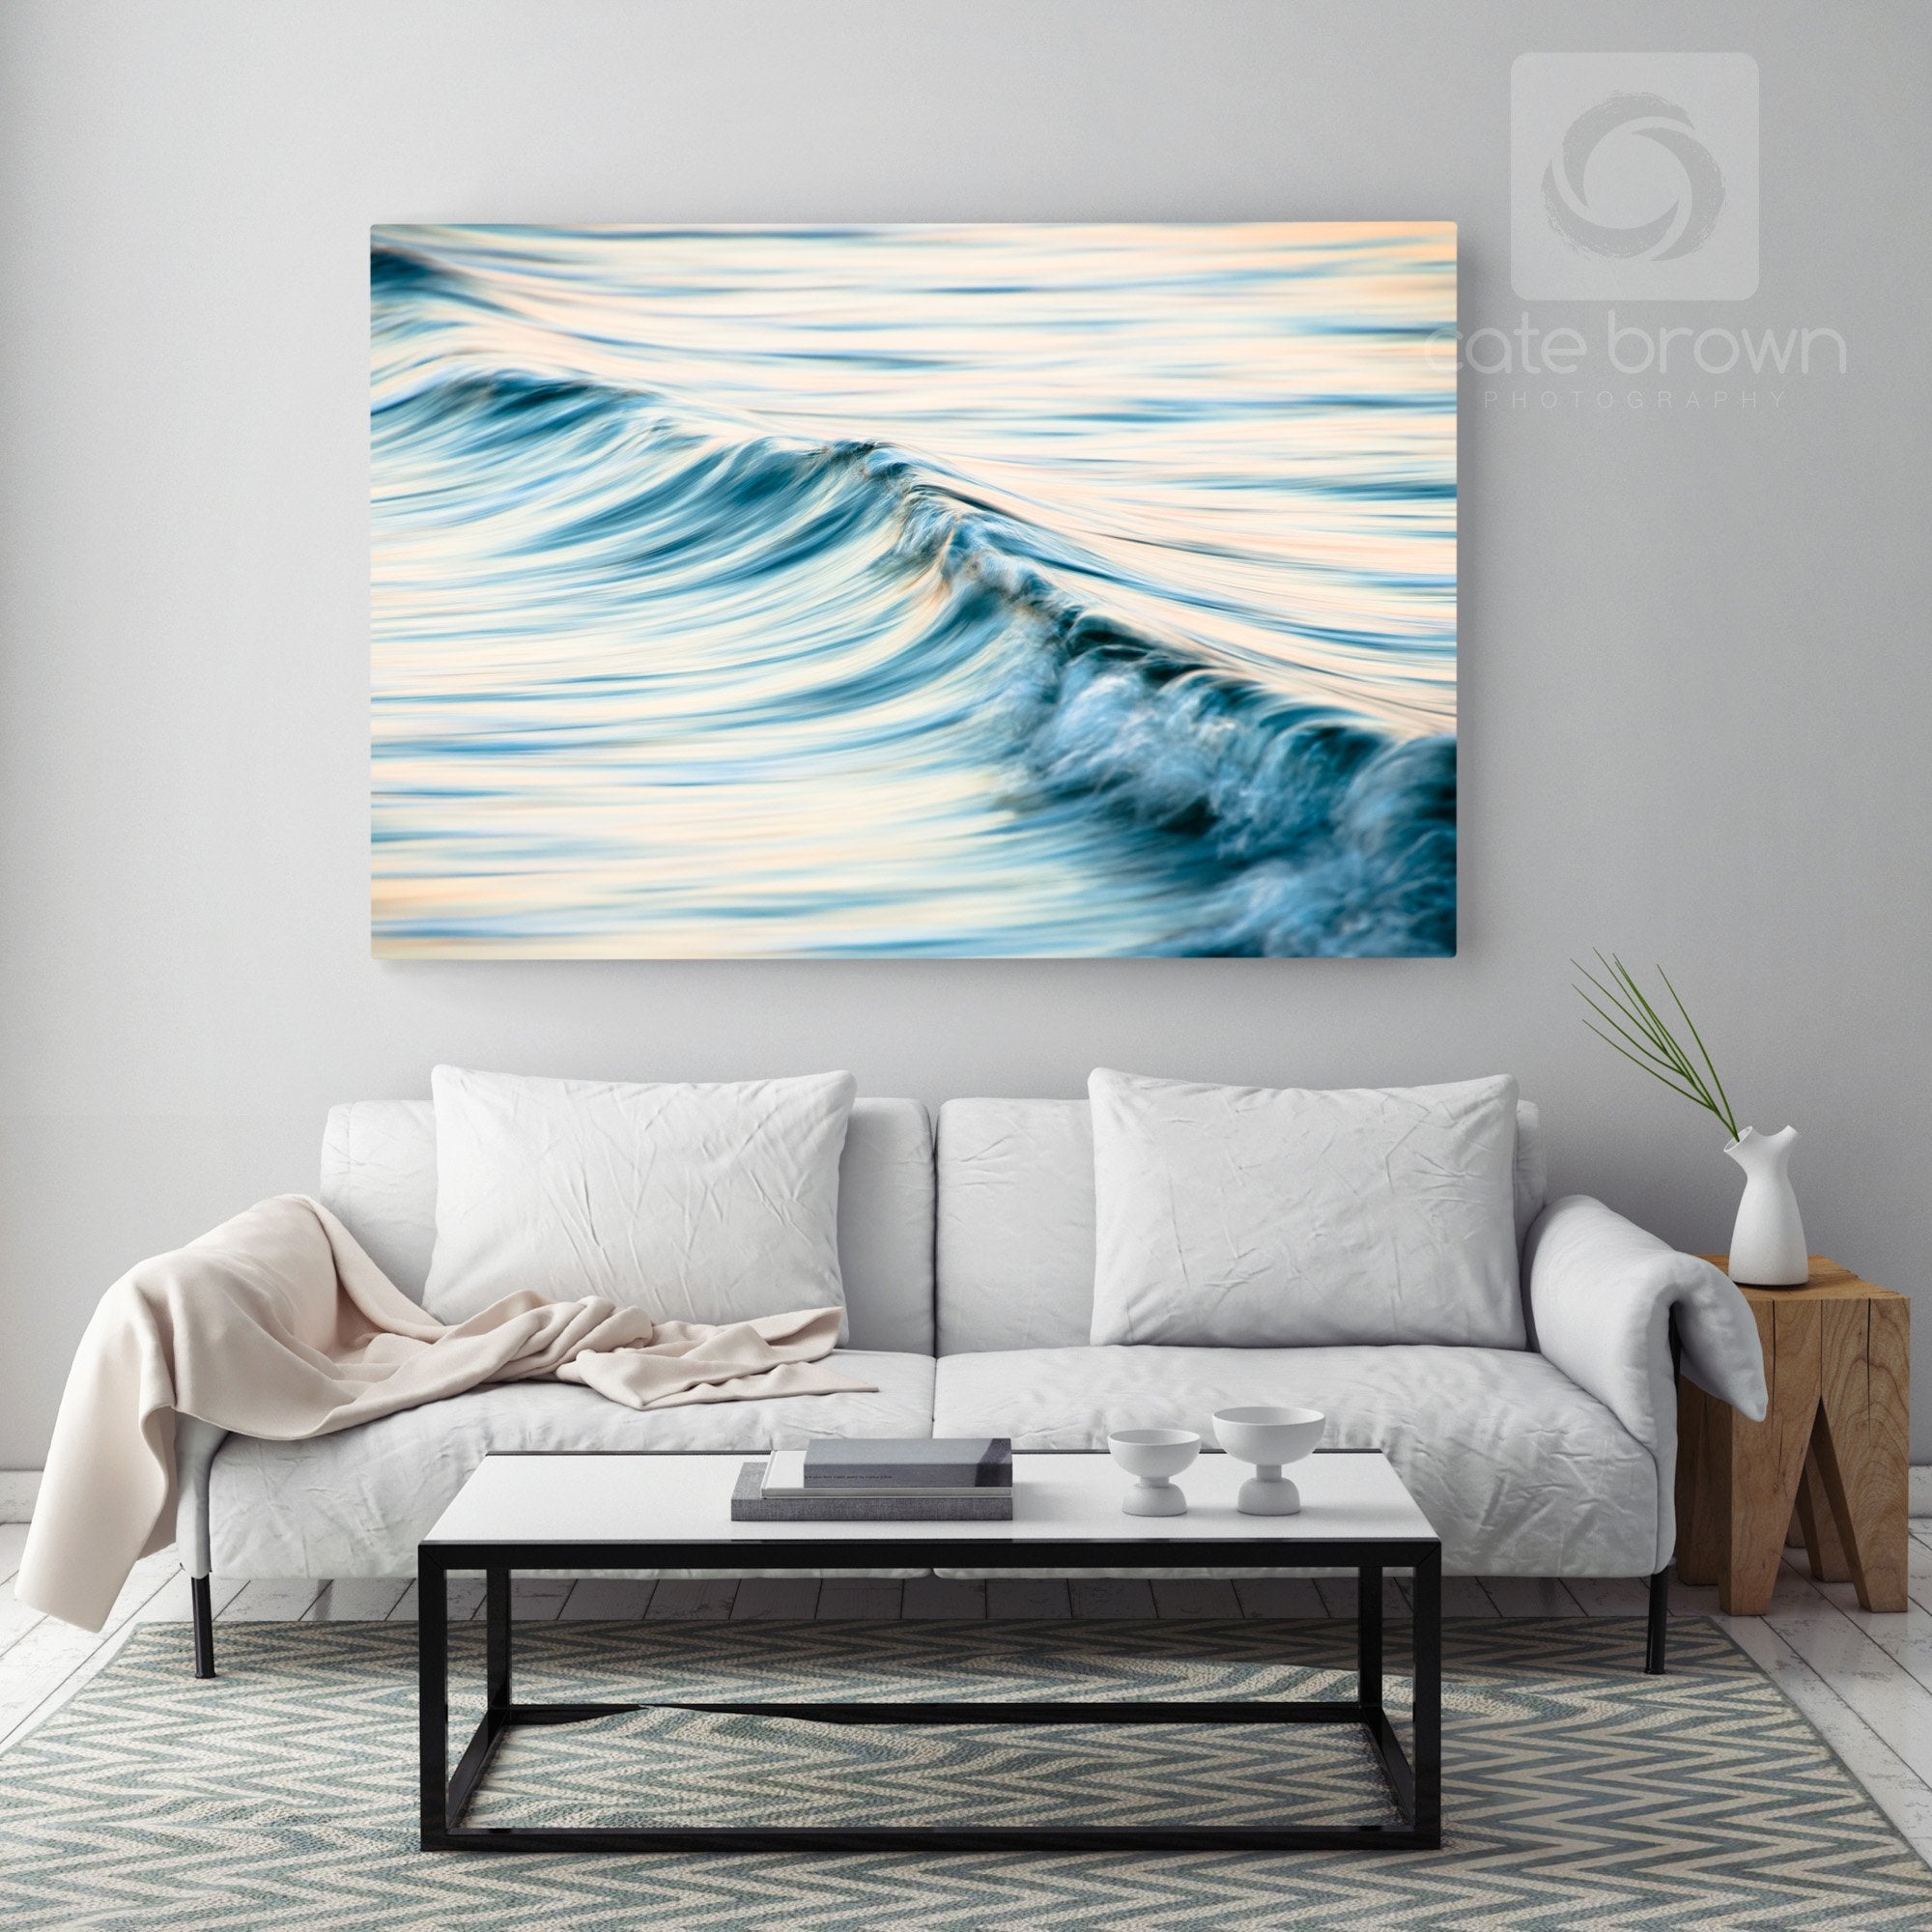 Cate Brown Photo Soft Water #9  //  Ocean Photography Made to Order Ocean Fine Art